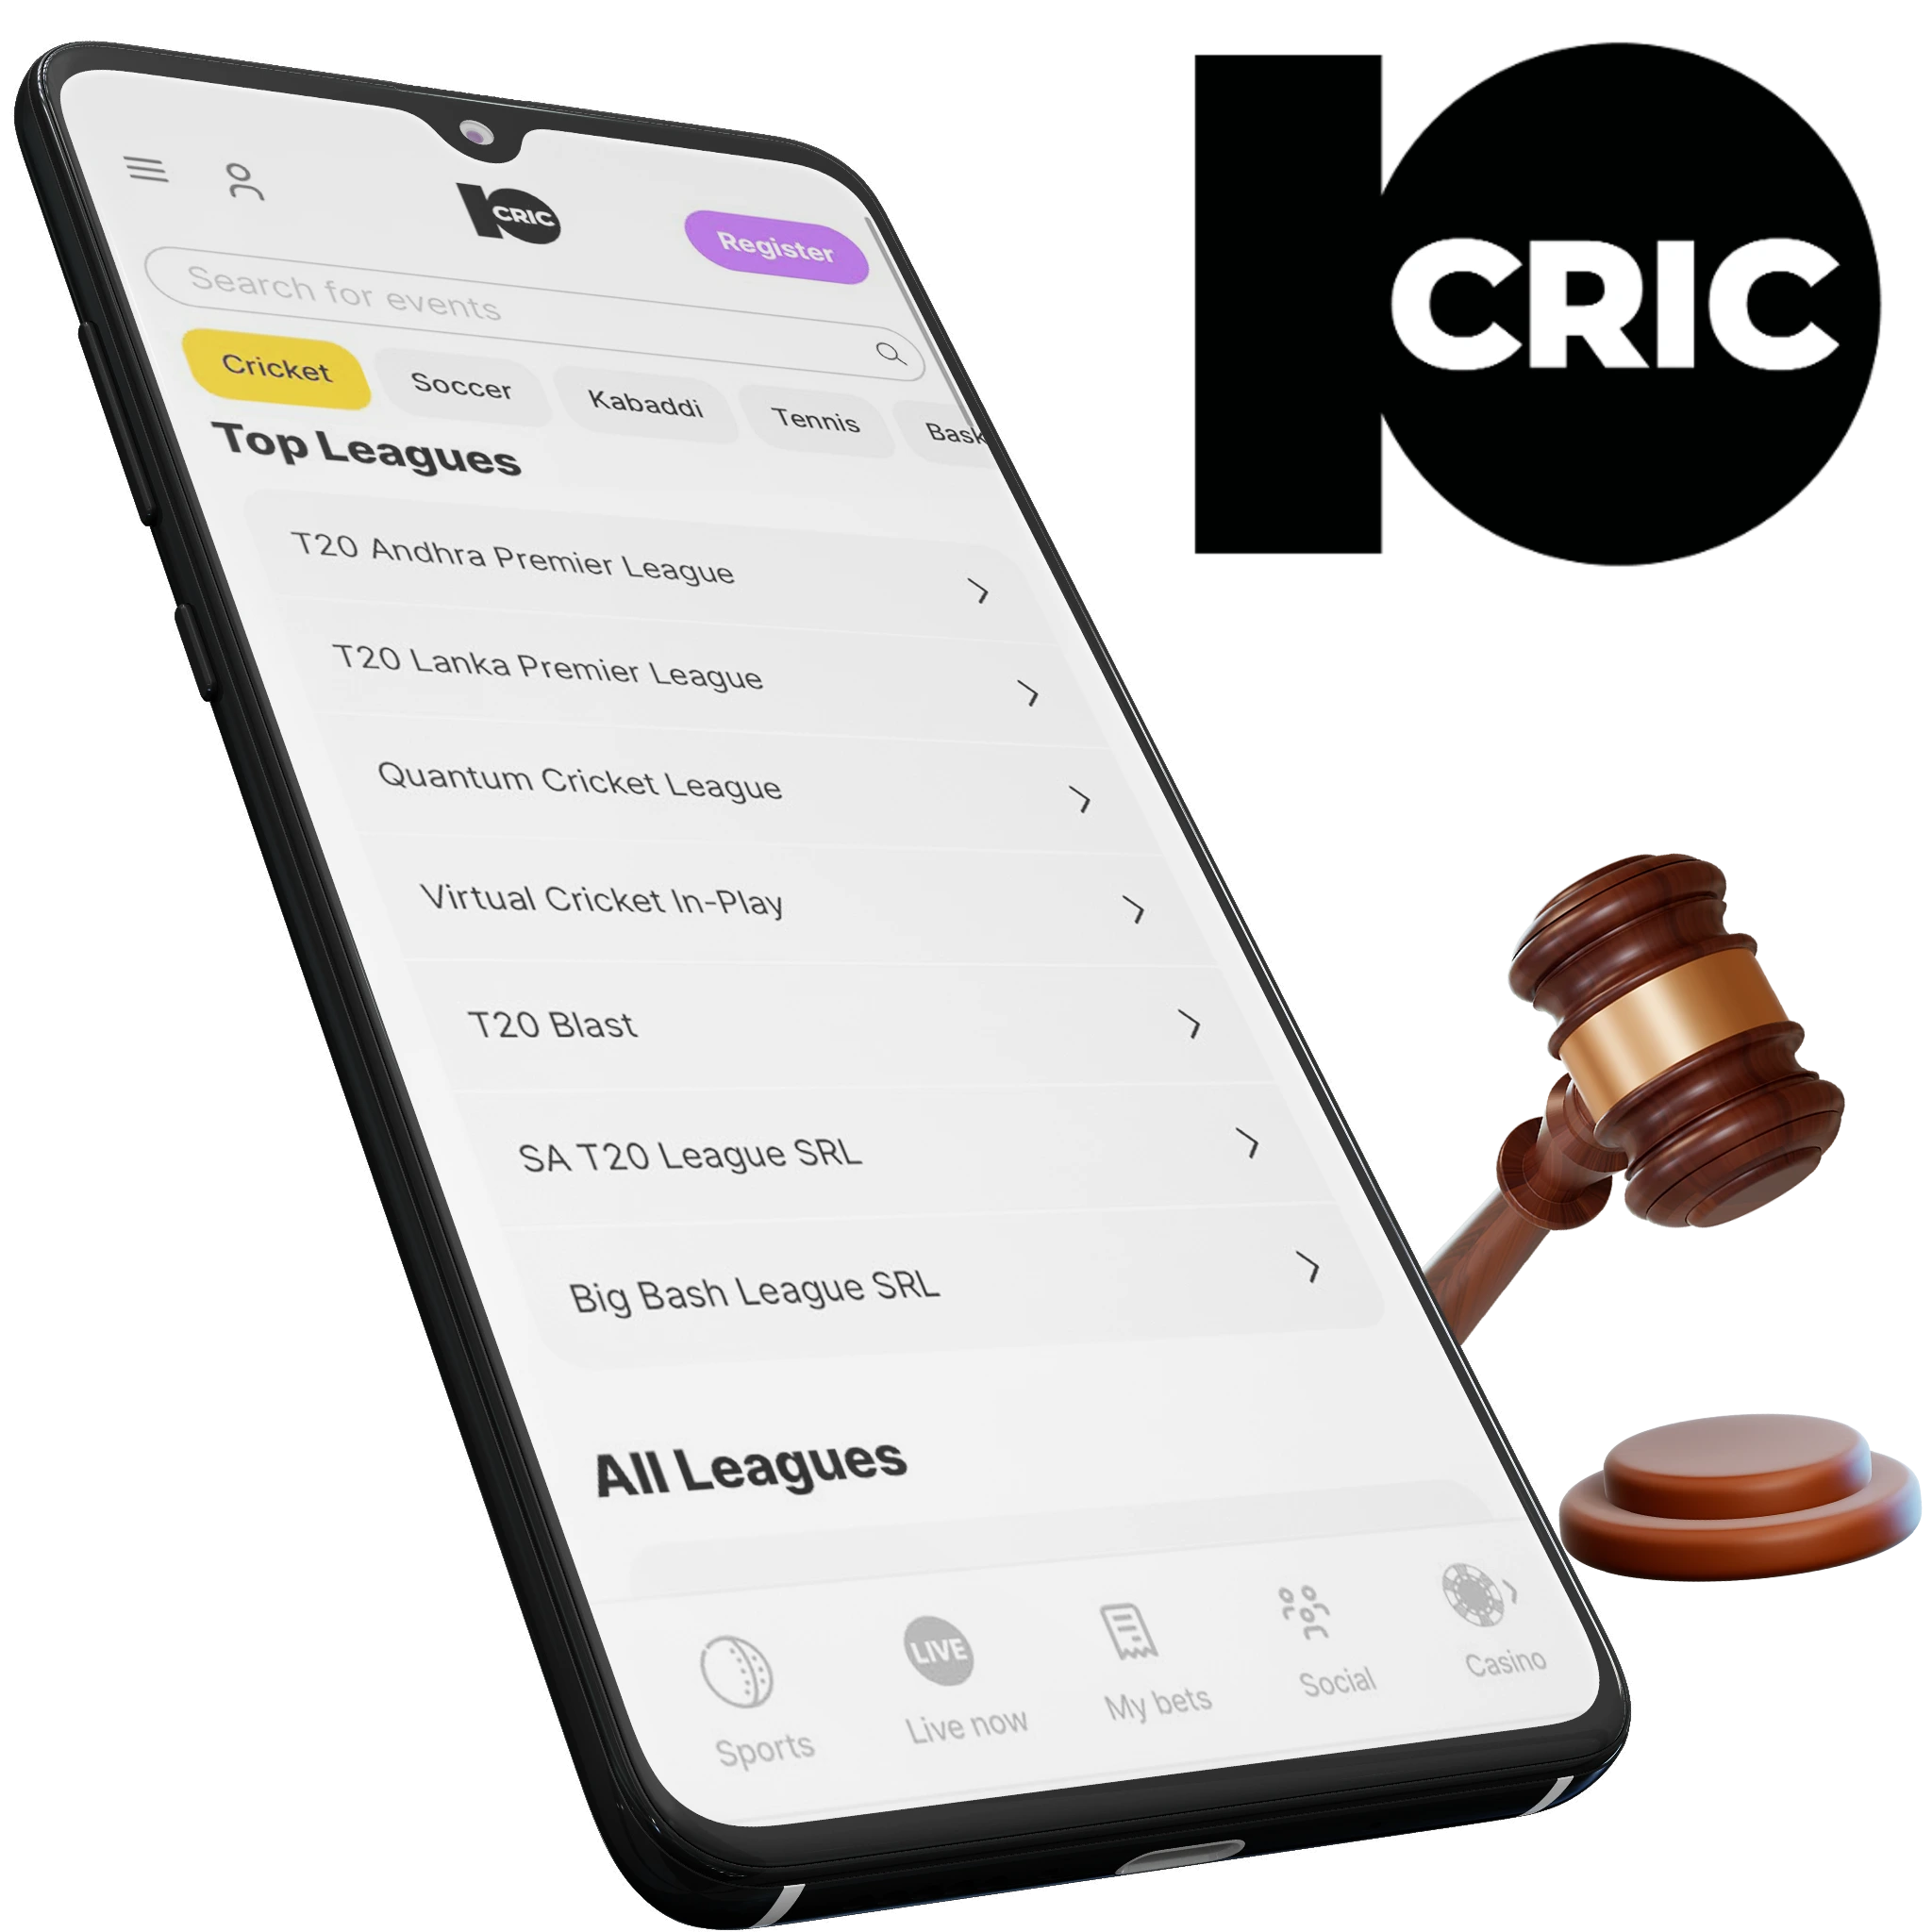 10cric App is the most legal and safe place where you can register your cricket bets right in the lobby.